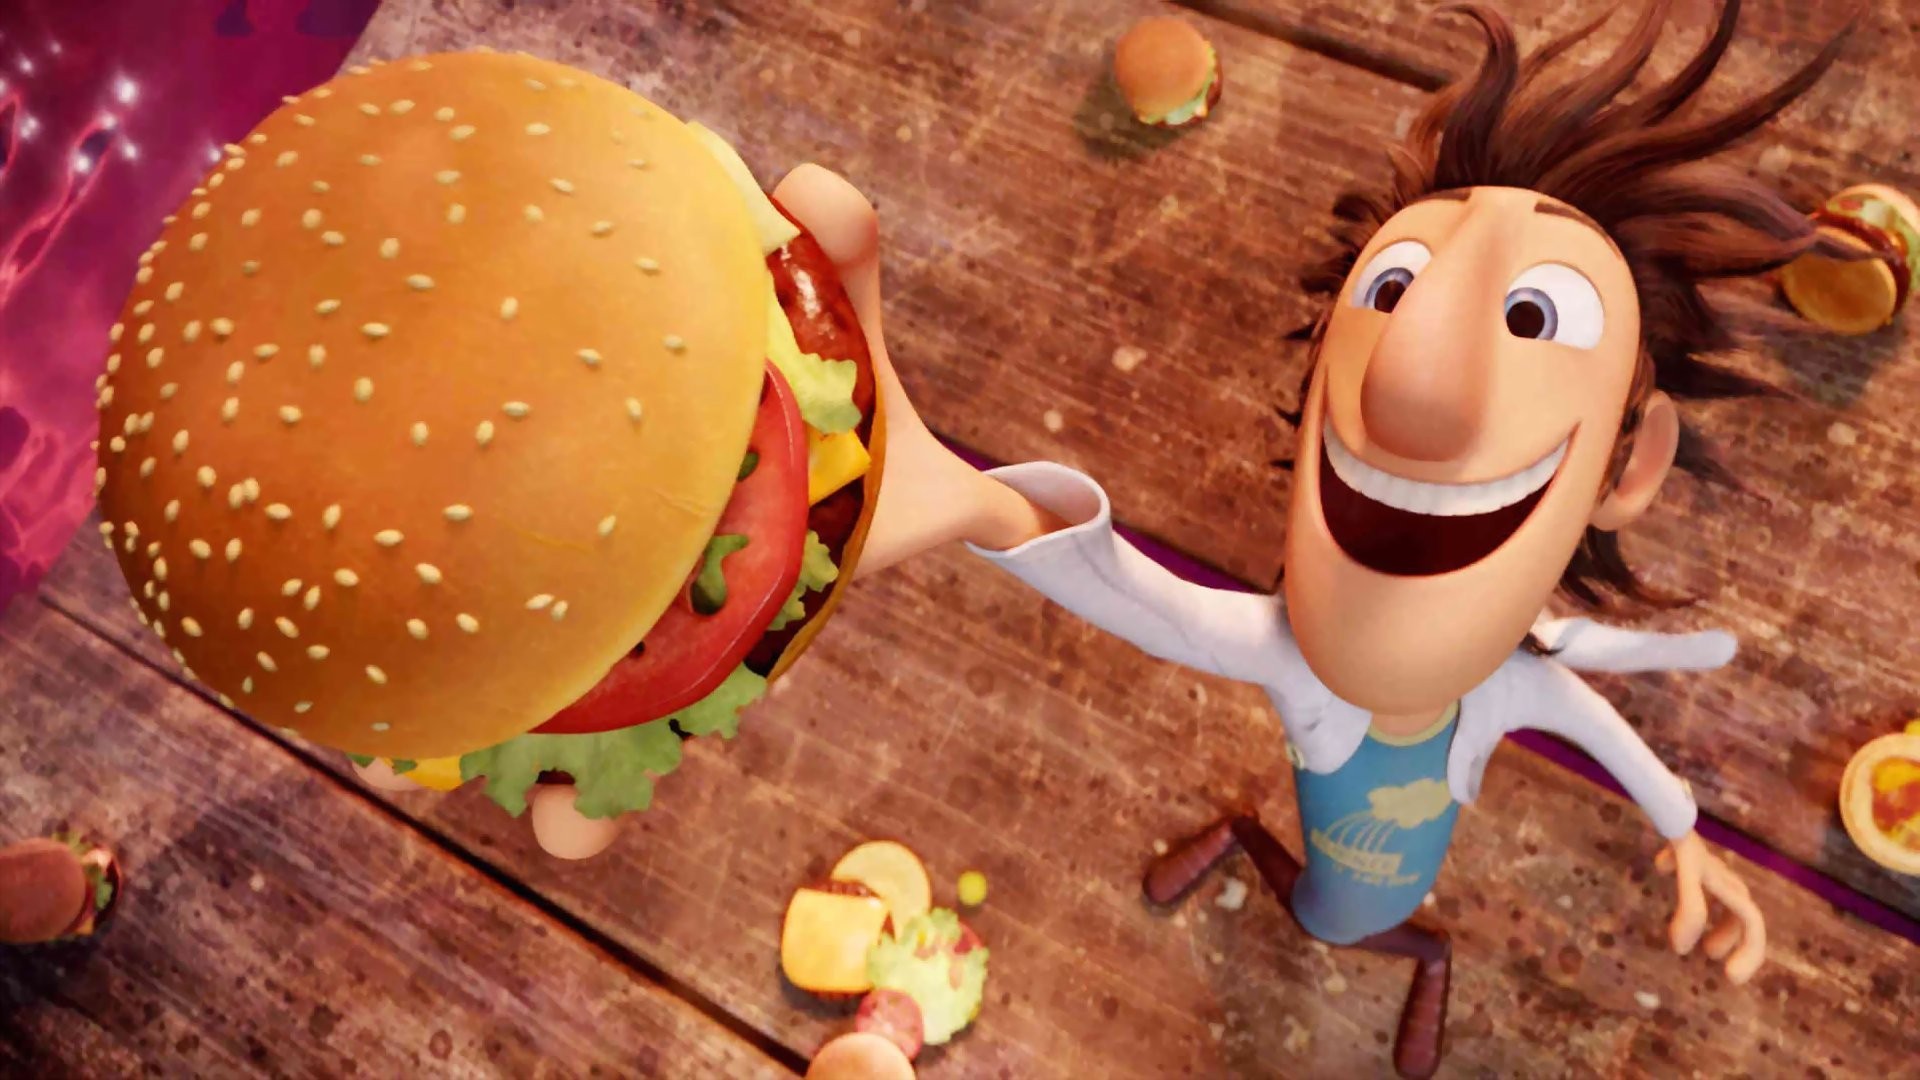 Cloudy With A Chance Of Meatballs Flint Lockwood 1920x1080